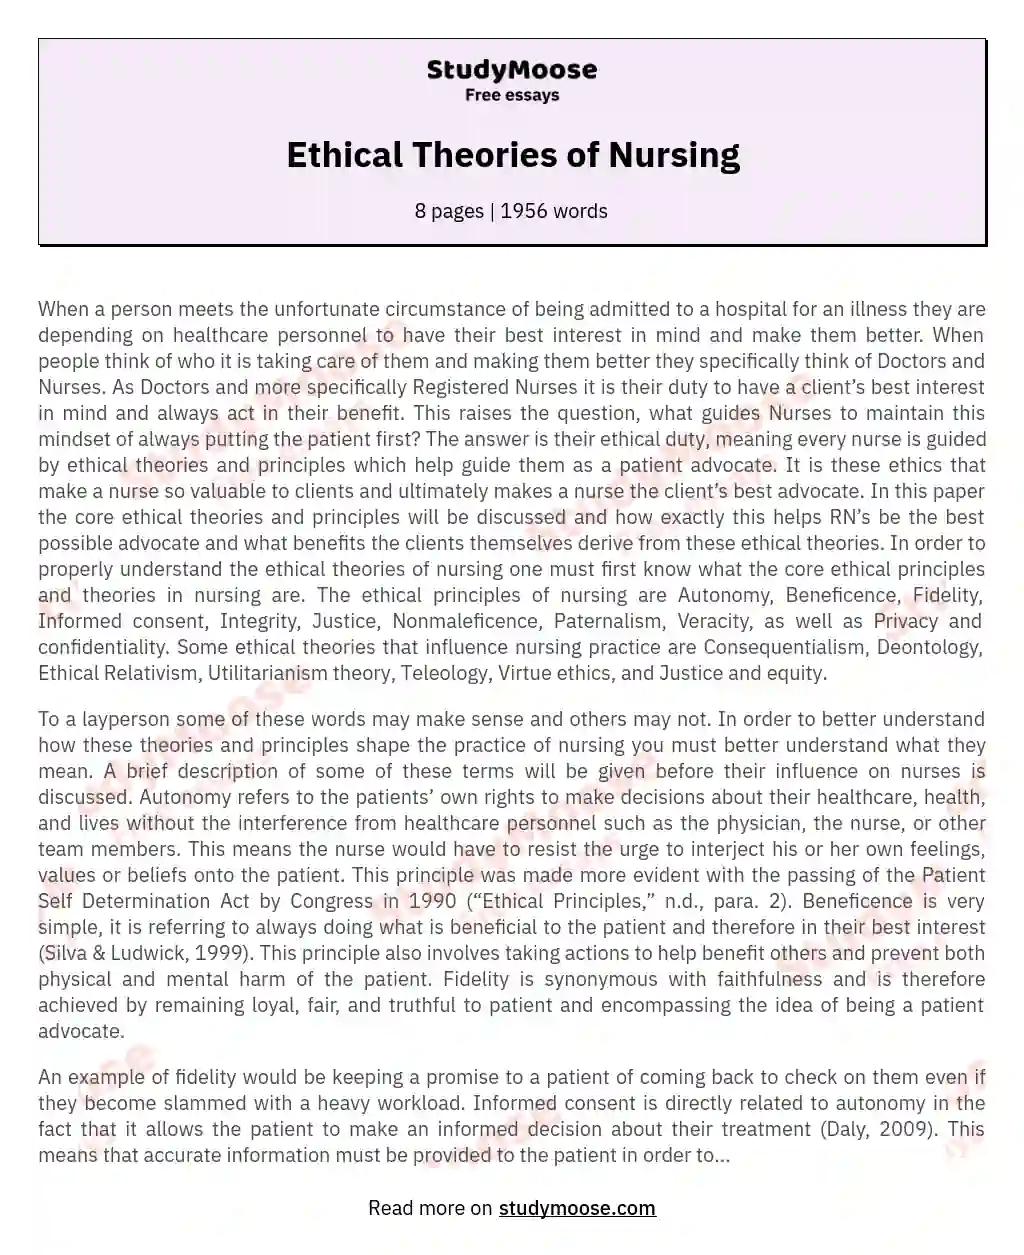 Ethical Theories of Nursing essay